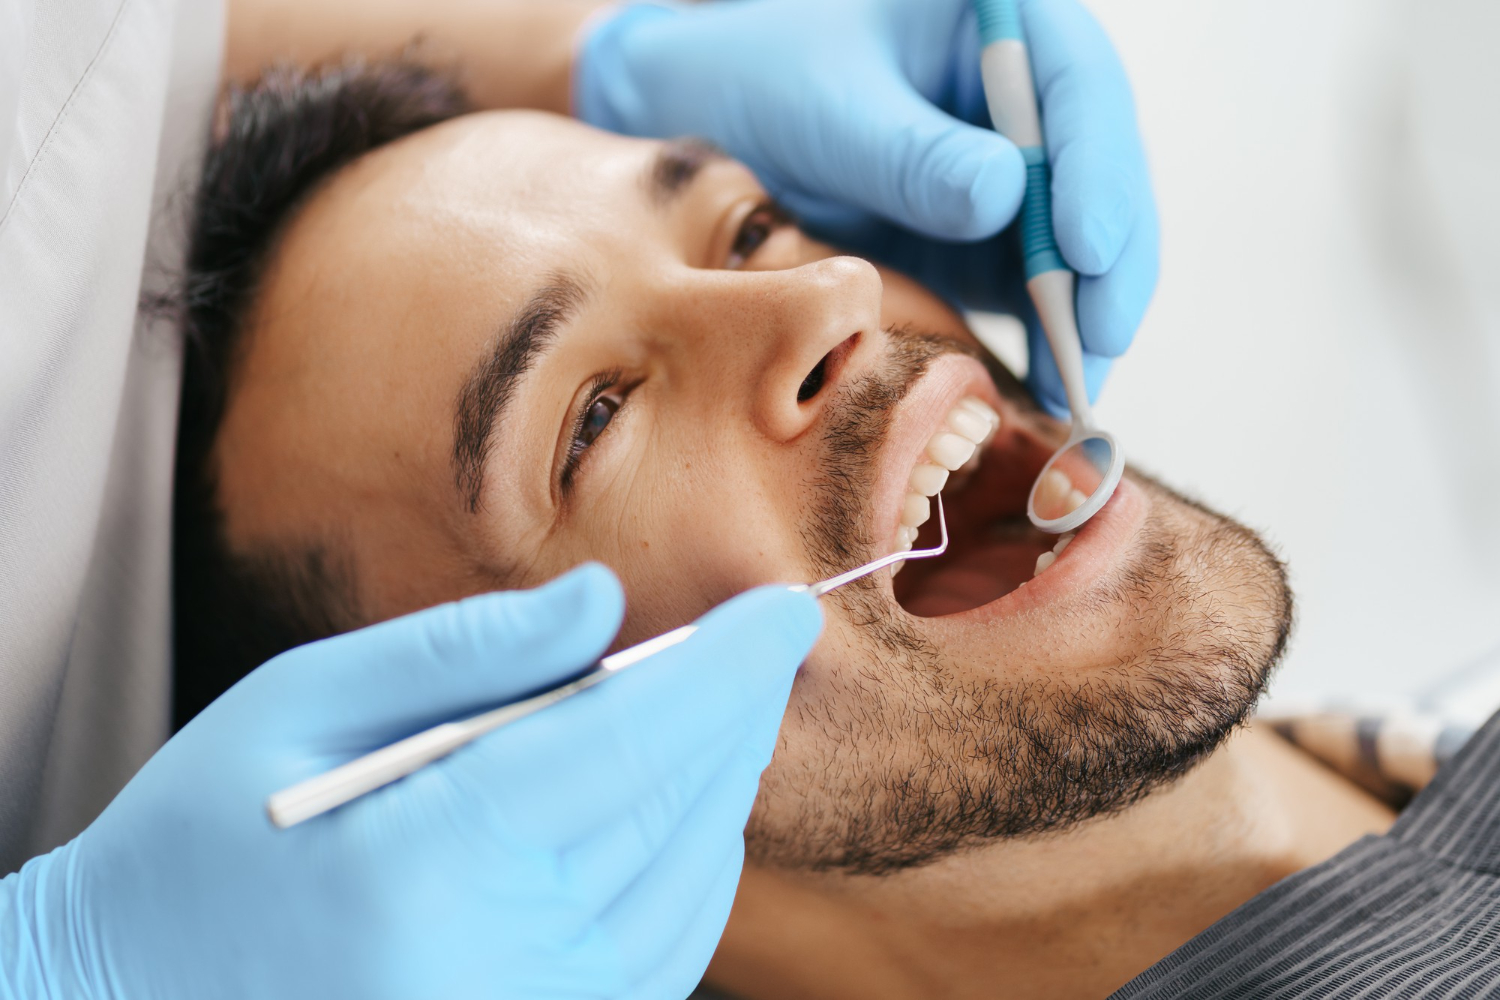 What are the topmost tips for choosing a dental clinic for your dental care?